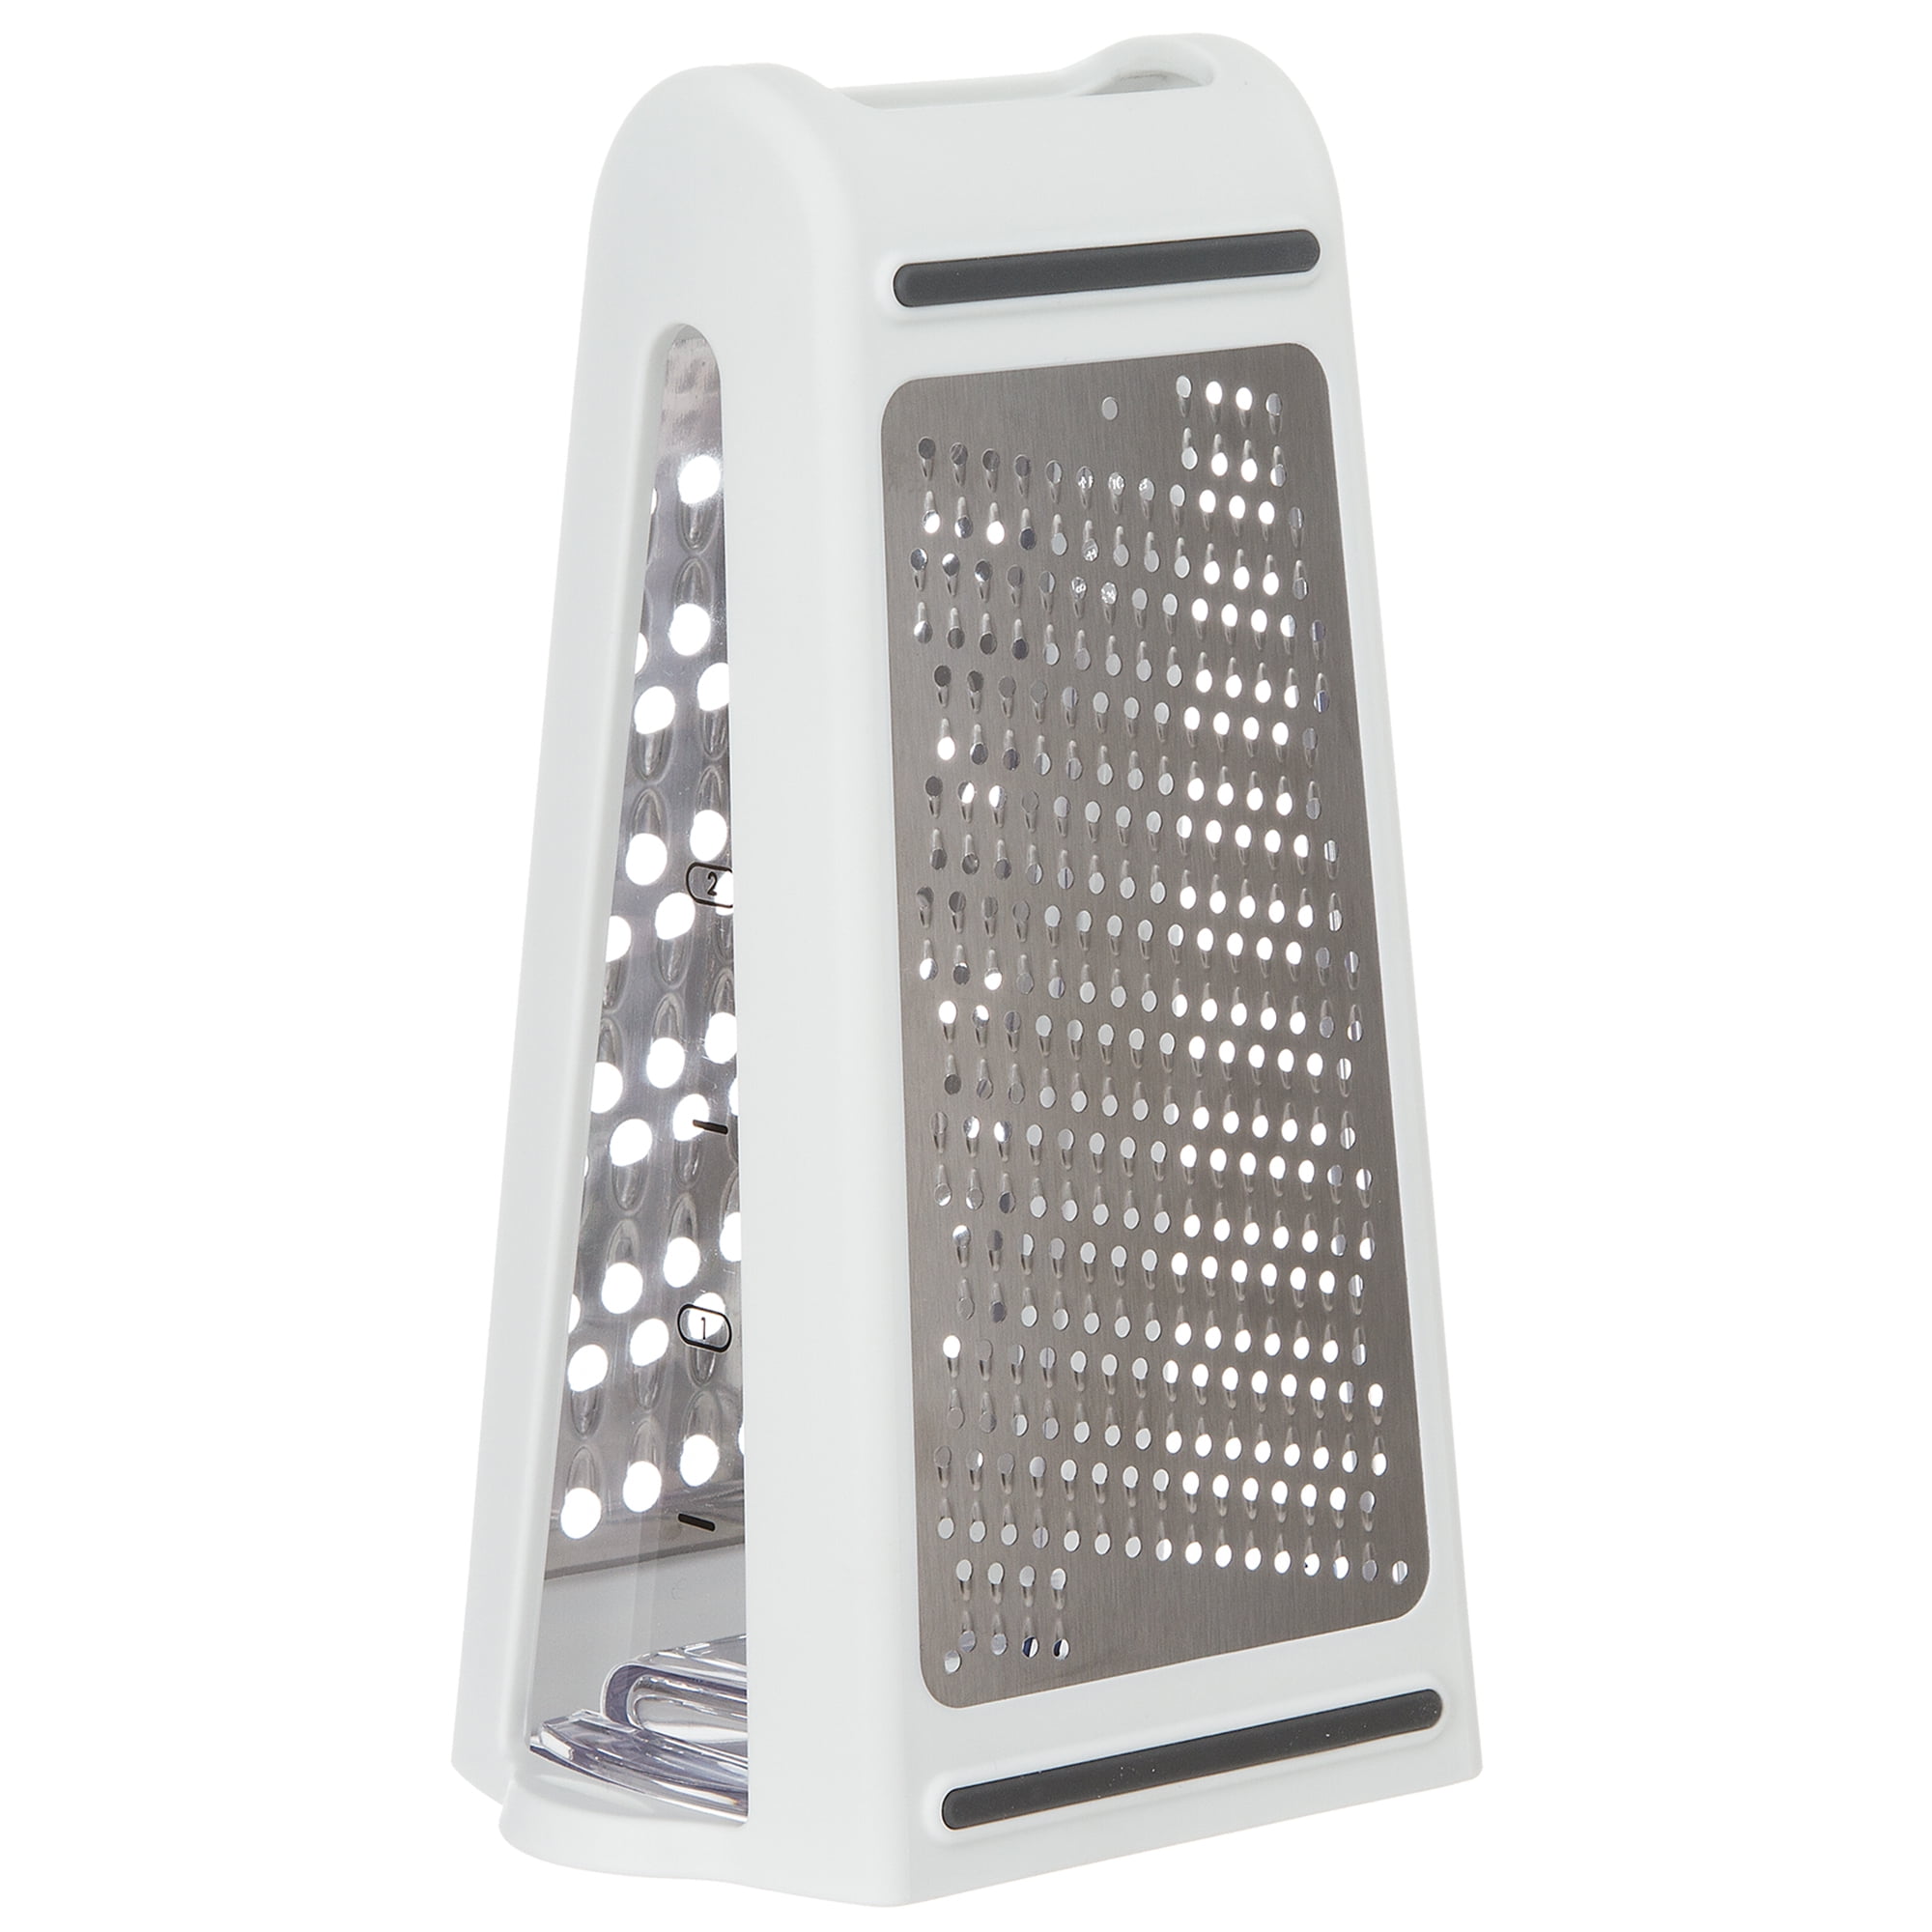 Prep Solutions Stainless Steel Hand-Held Medium Grater With Cover